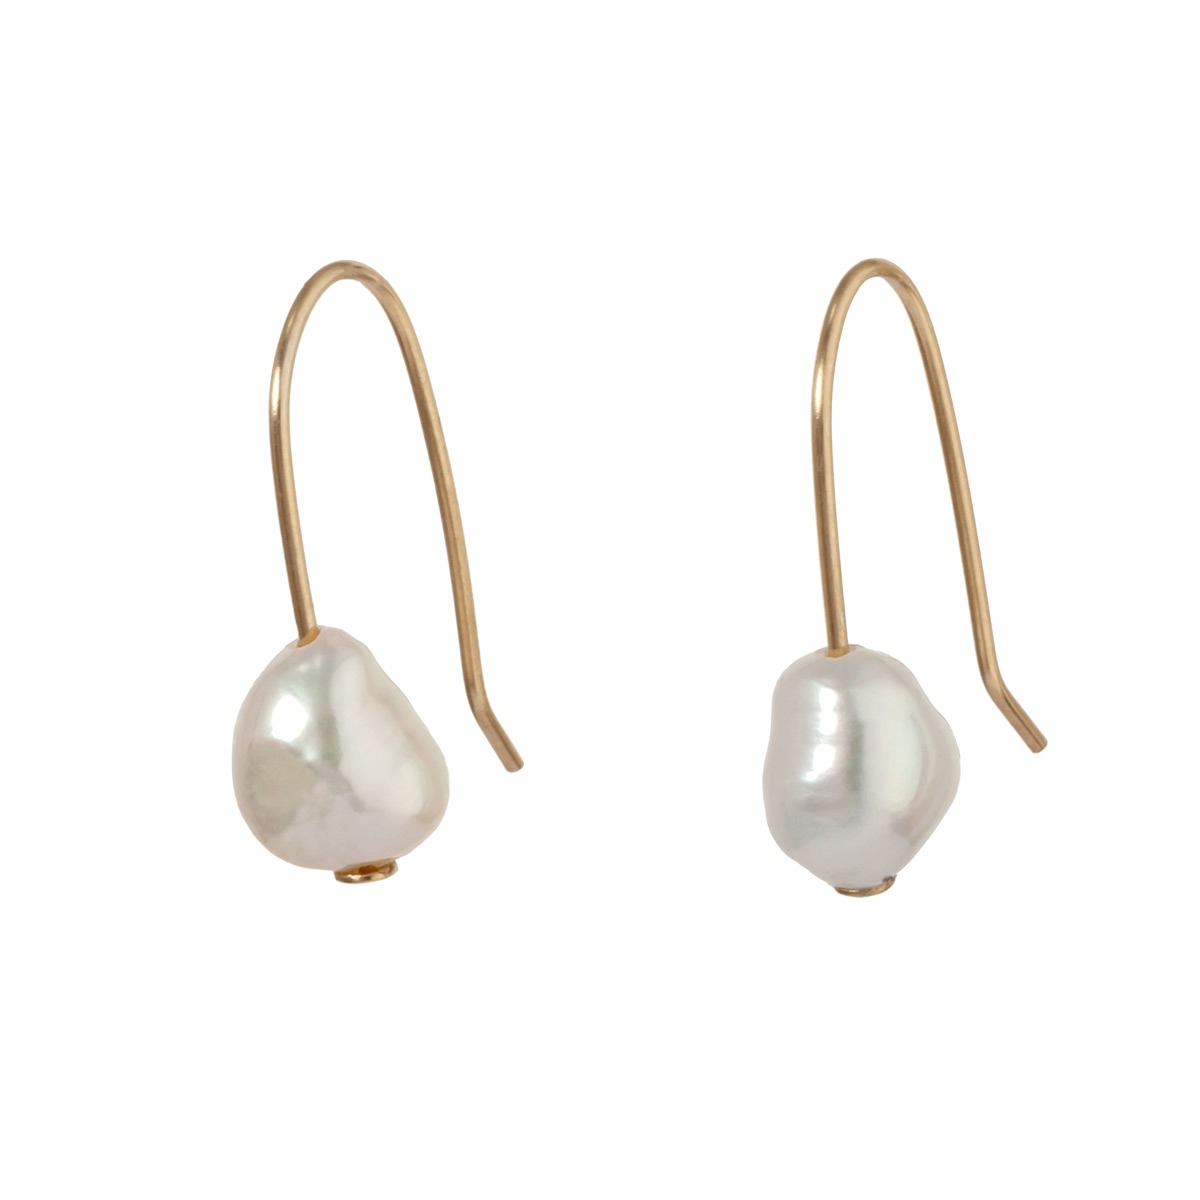 Medium White Pearl and Gold Earrings - Ardmore Jewellery